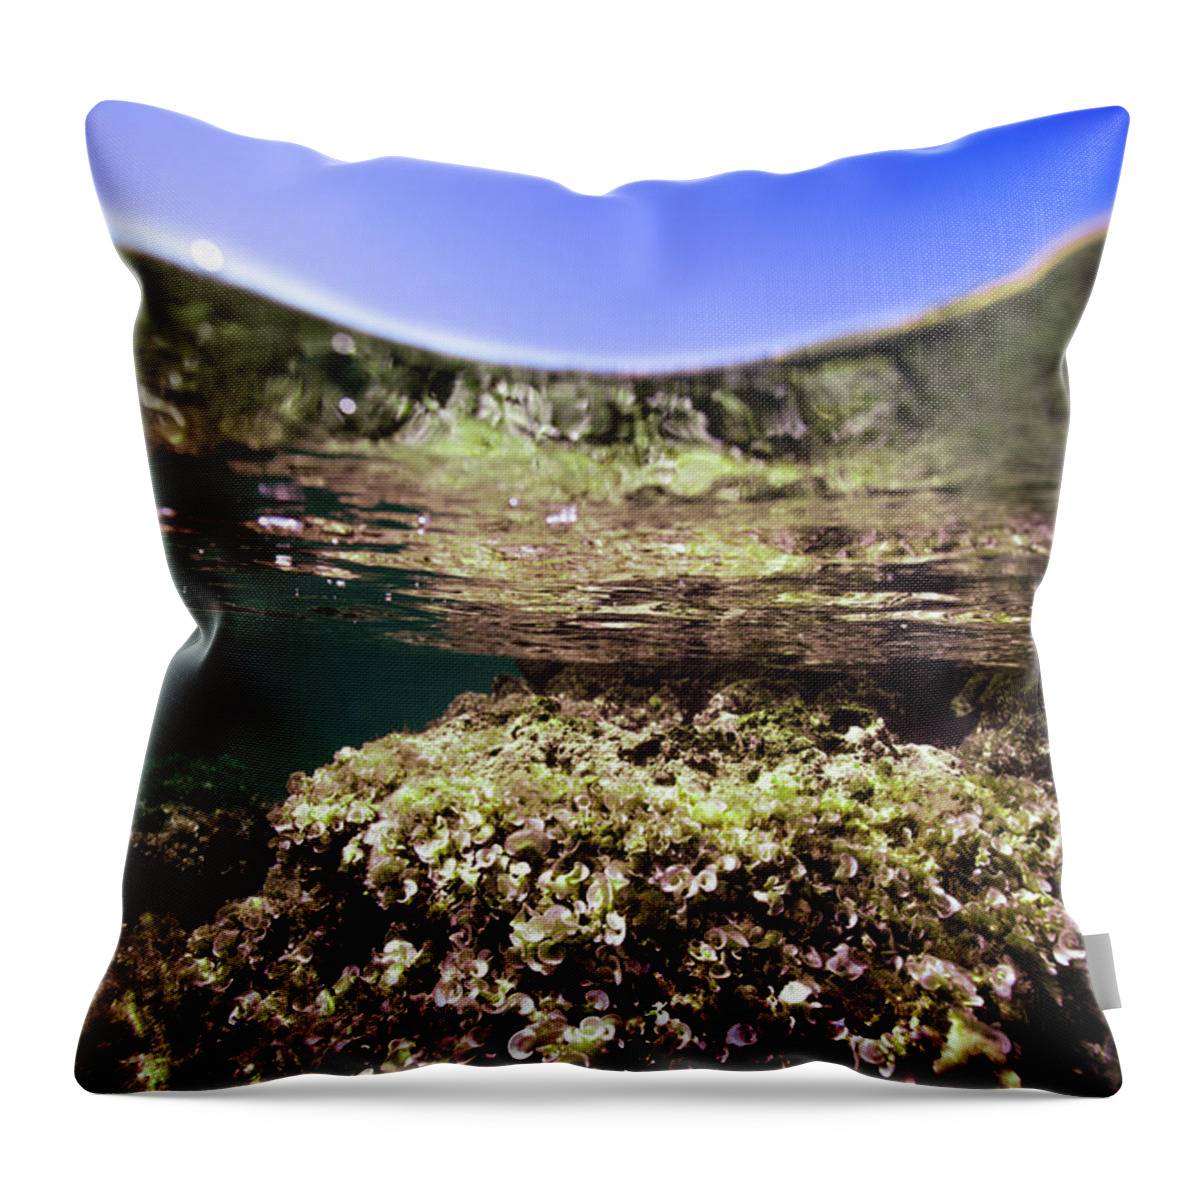 Underwater Throw Pillow featuring the photograph Coral Beauty by Gemma Silvestre